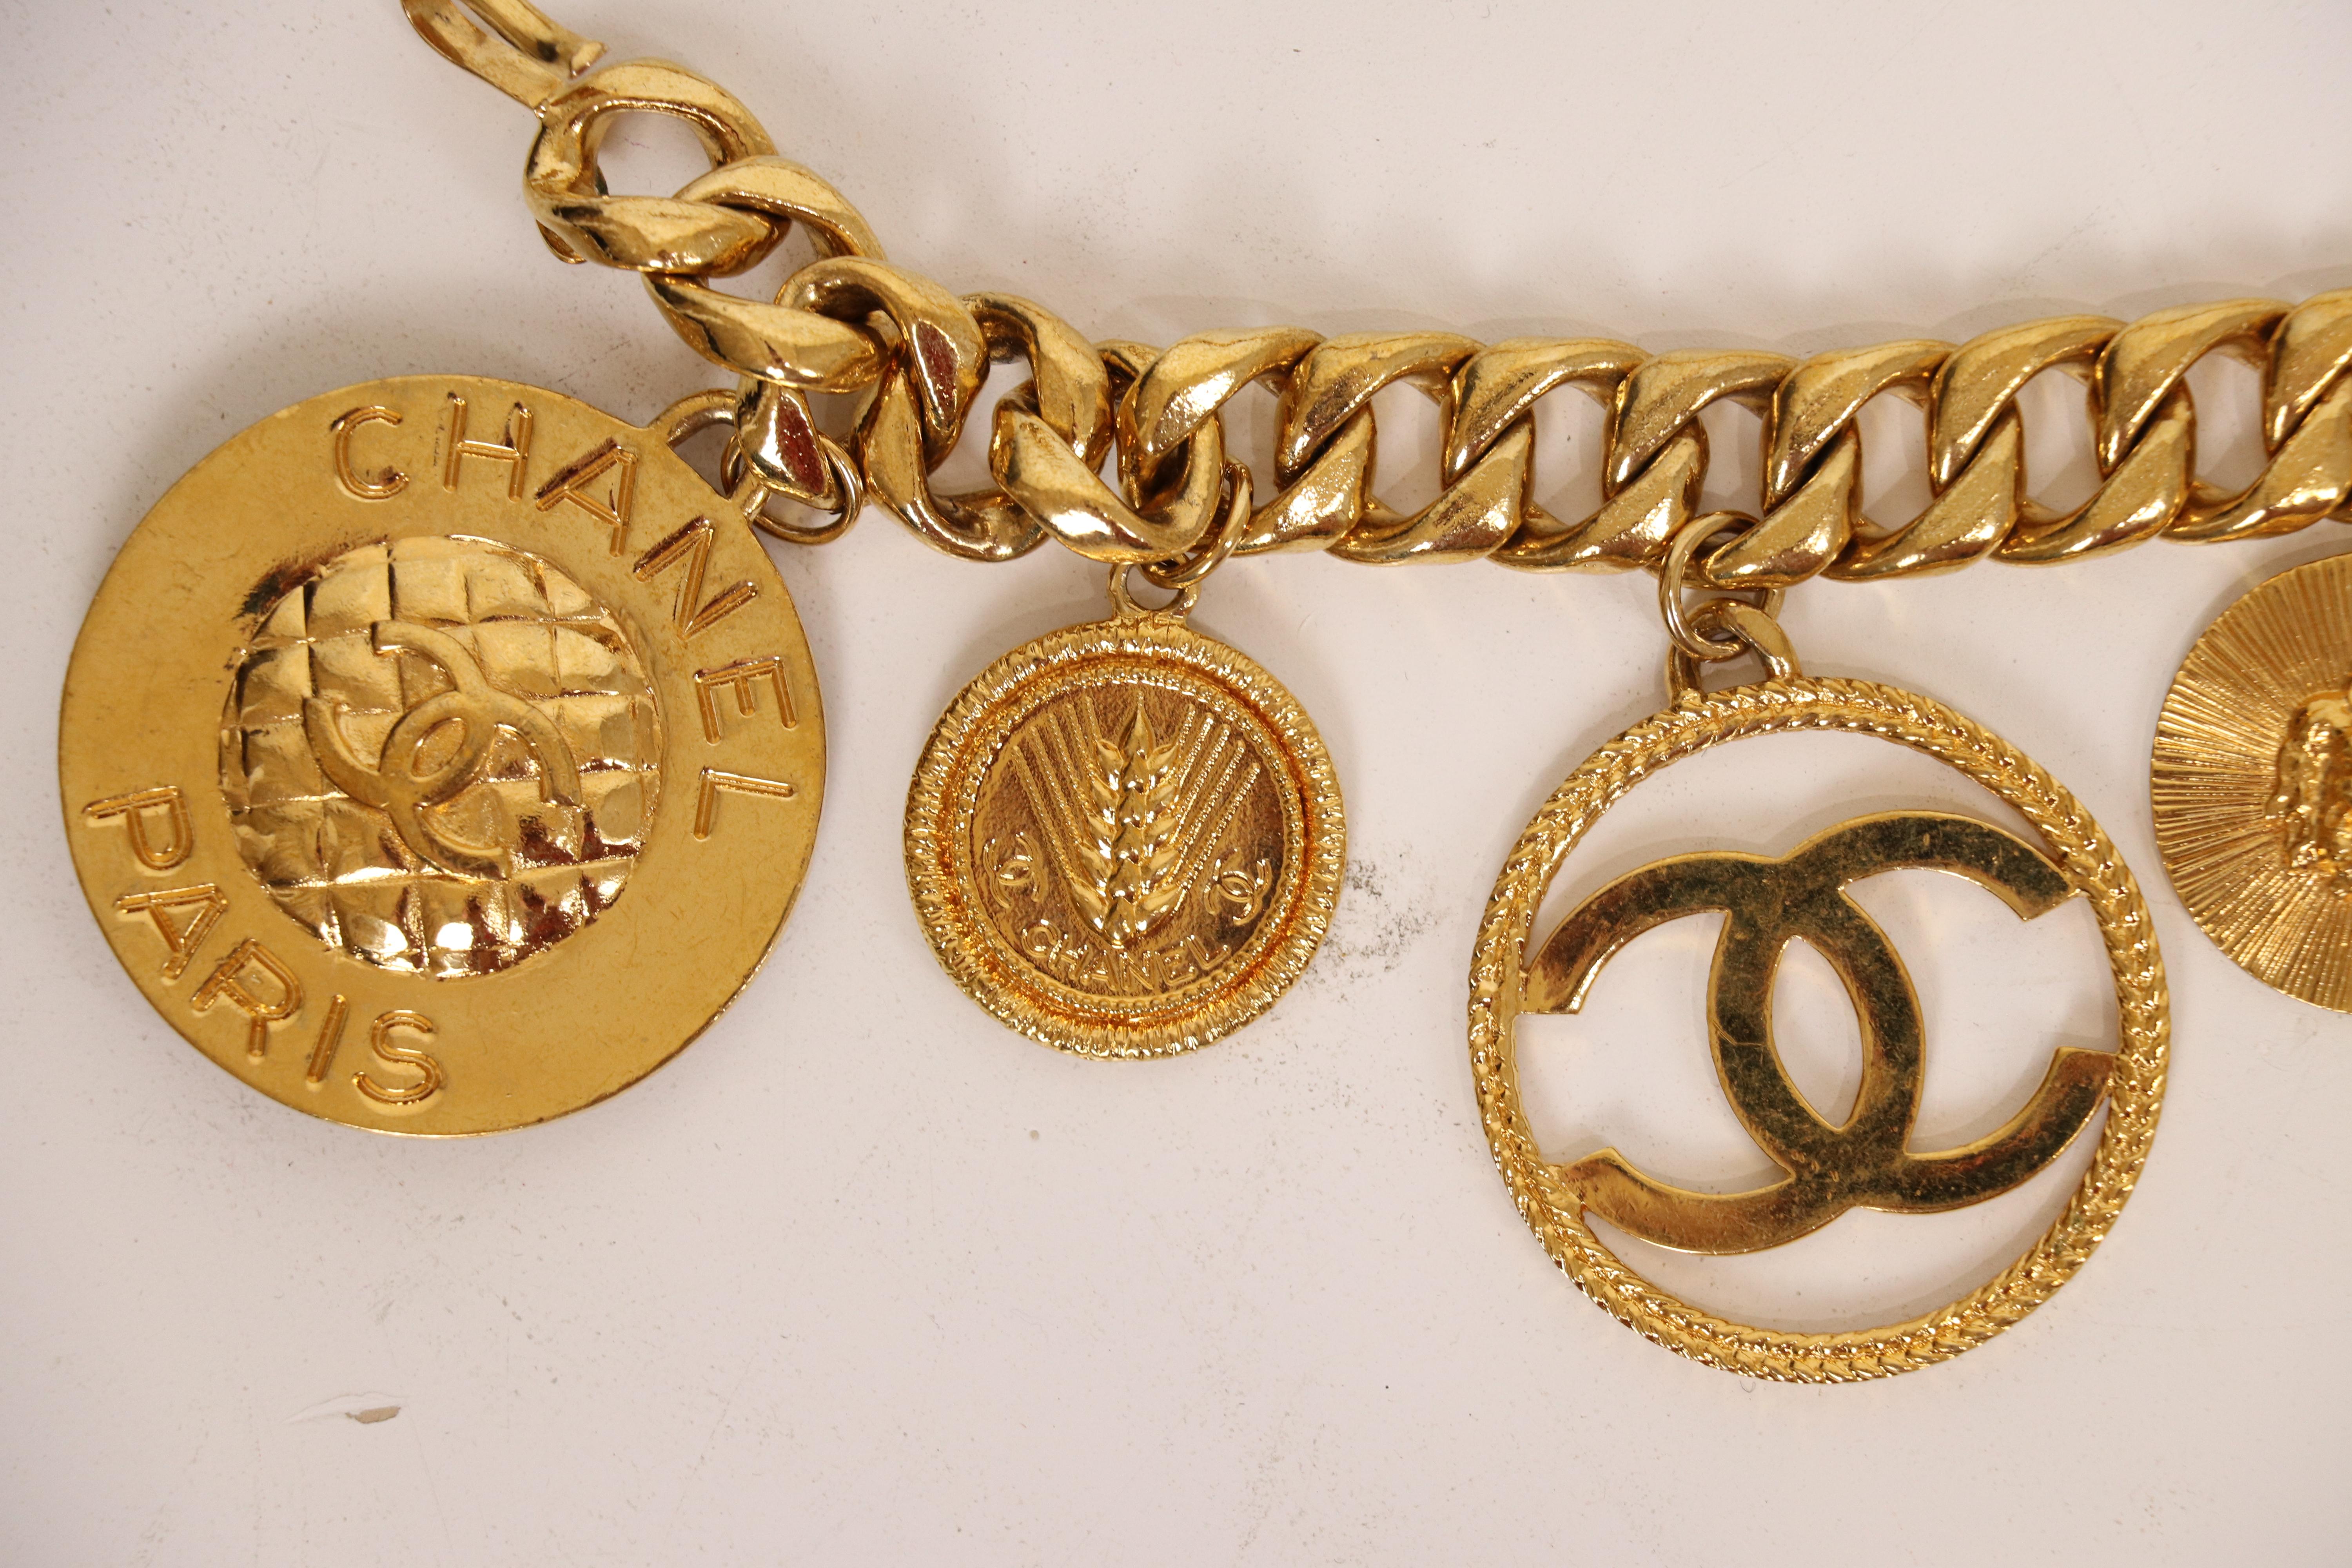 Chanel Collection 28 / 1991 Vintage Iconic 9 Charm Necklace or Belt 1